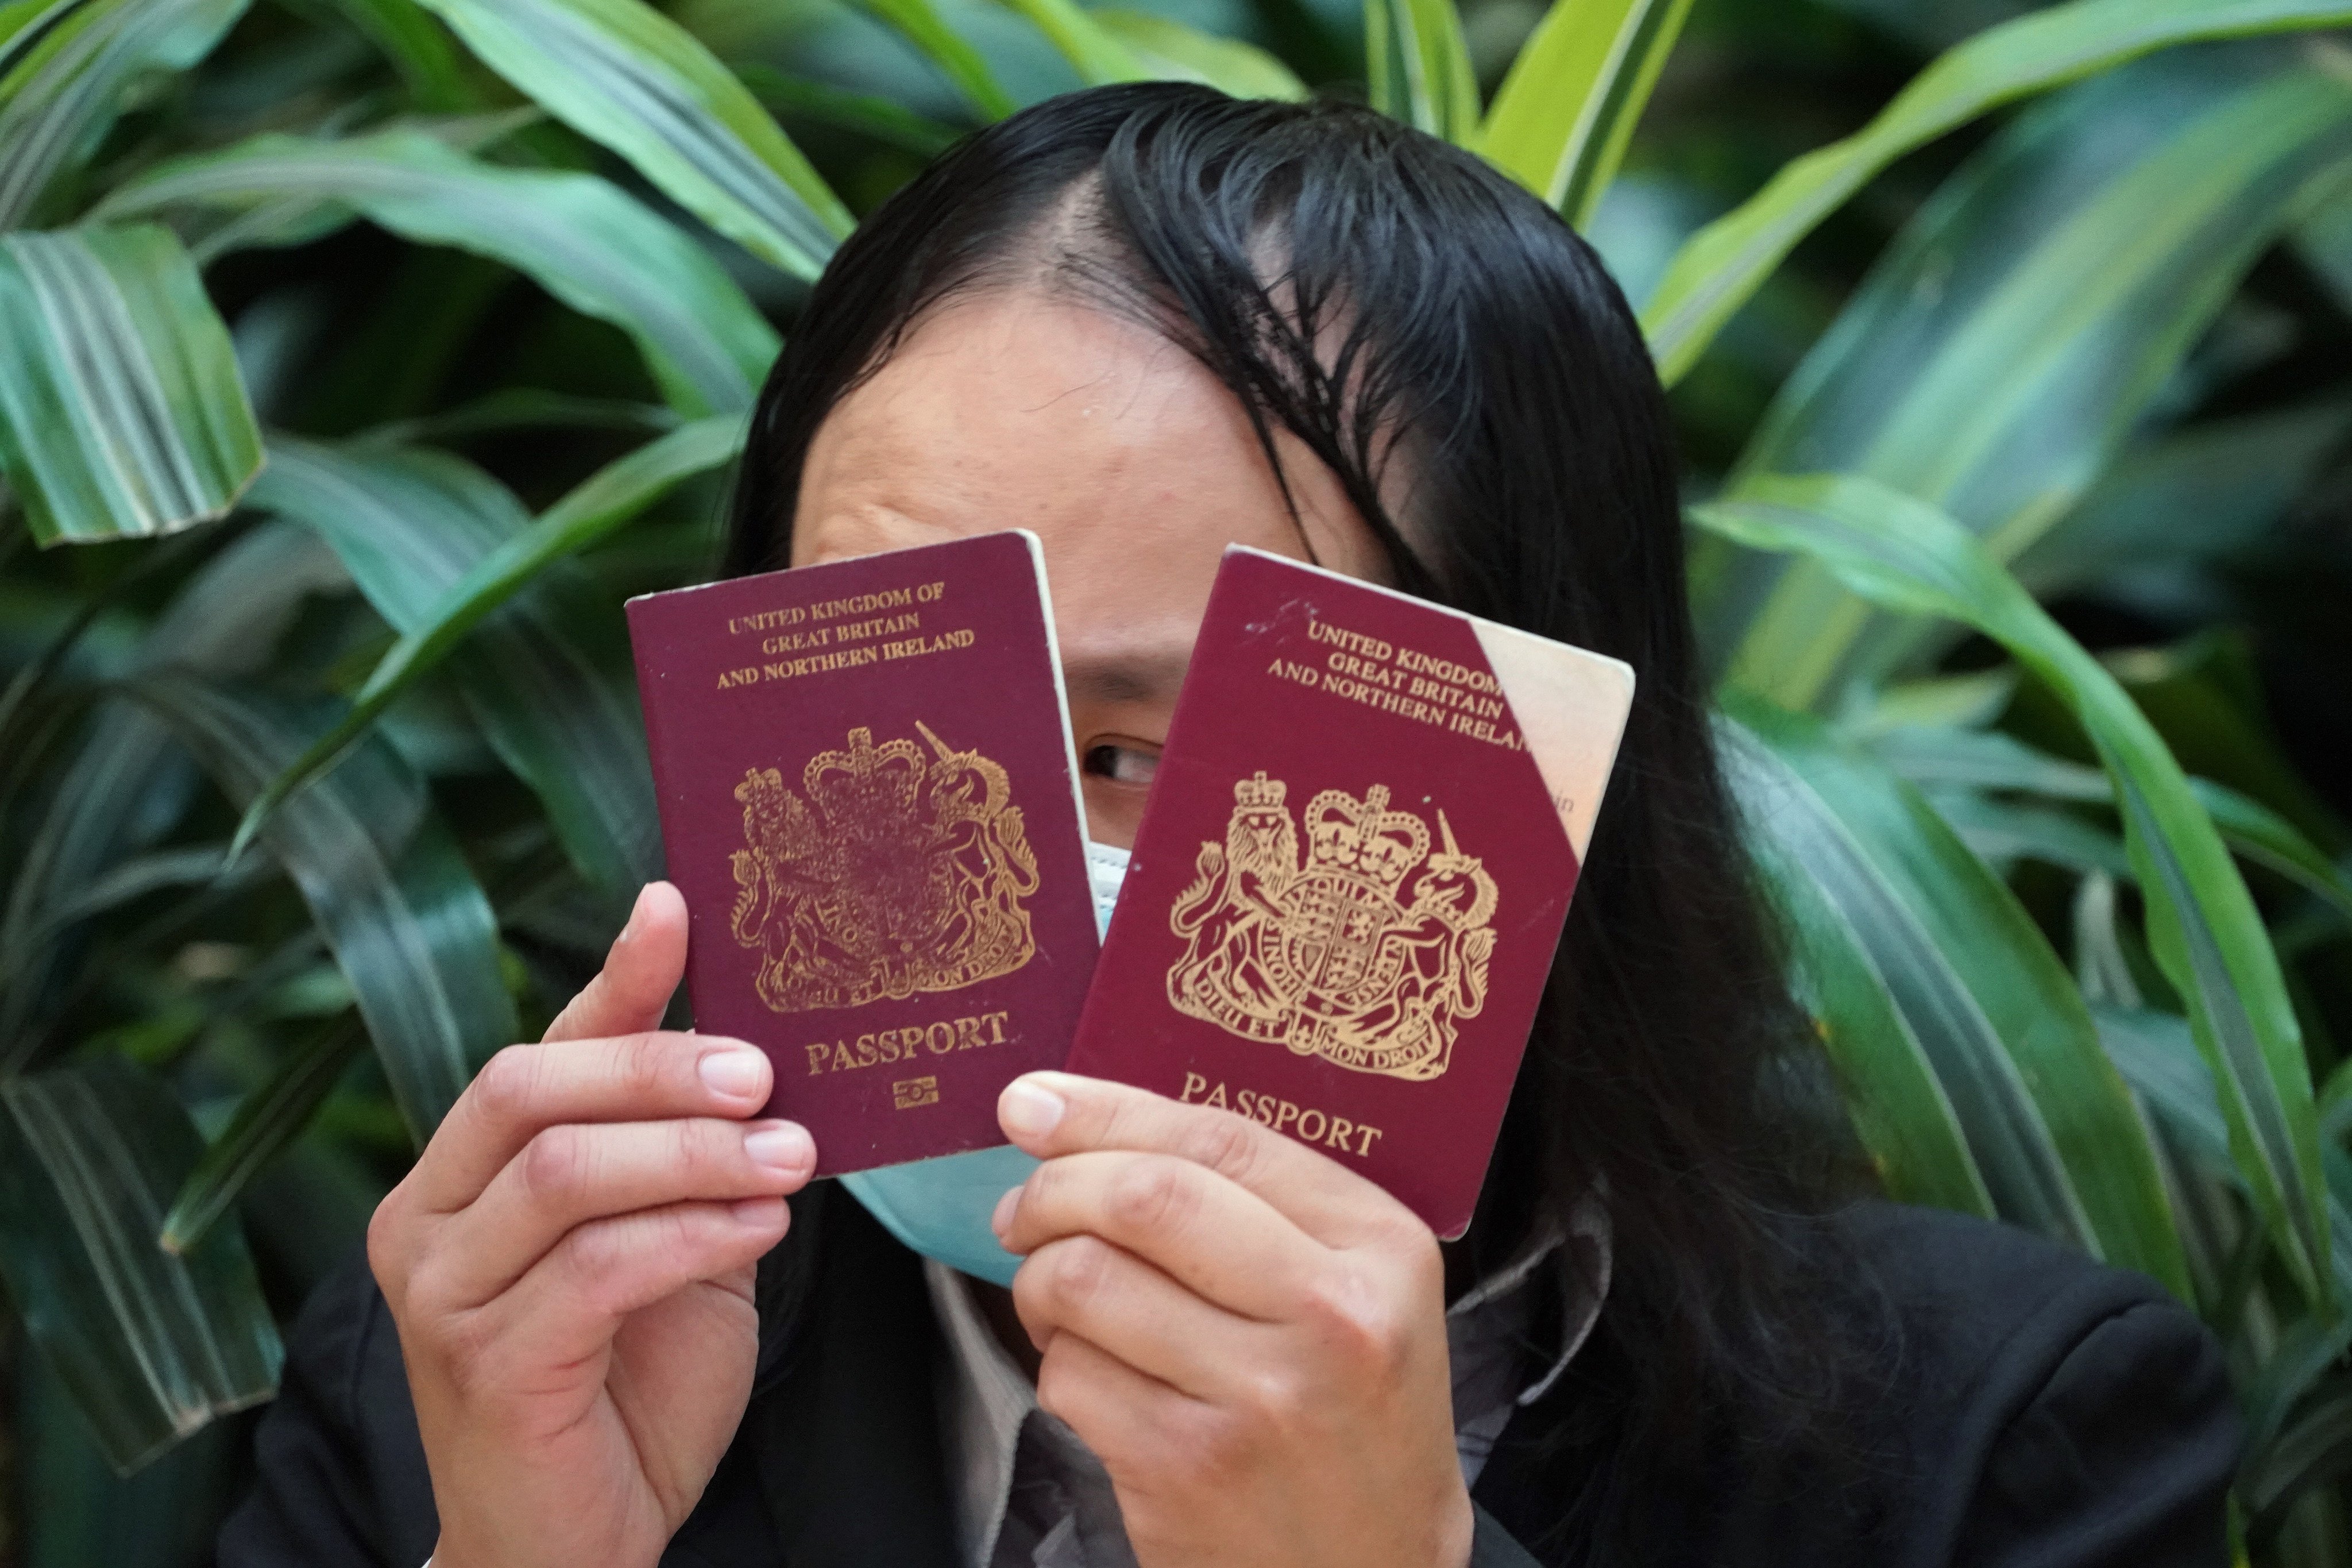 A protester holds a British National (Overseas) passport during a demonstration at Pacific Place in Admiralty on June 2, 2020. BN(O) passport holders abroad have raised concerns about being denied access to the funds in their Mandatory Provident Fund accounts in Hong Kong. Photo: Felix Wong